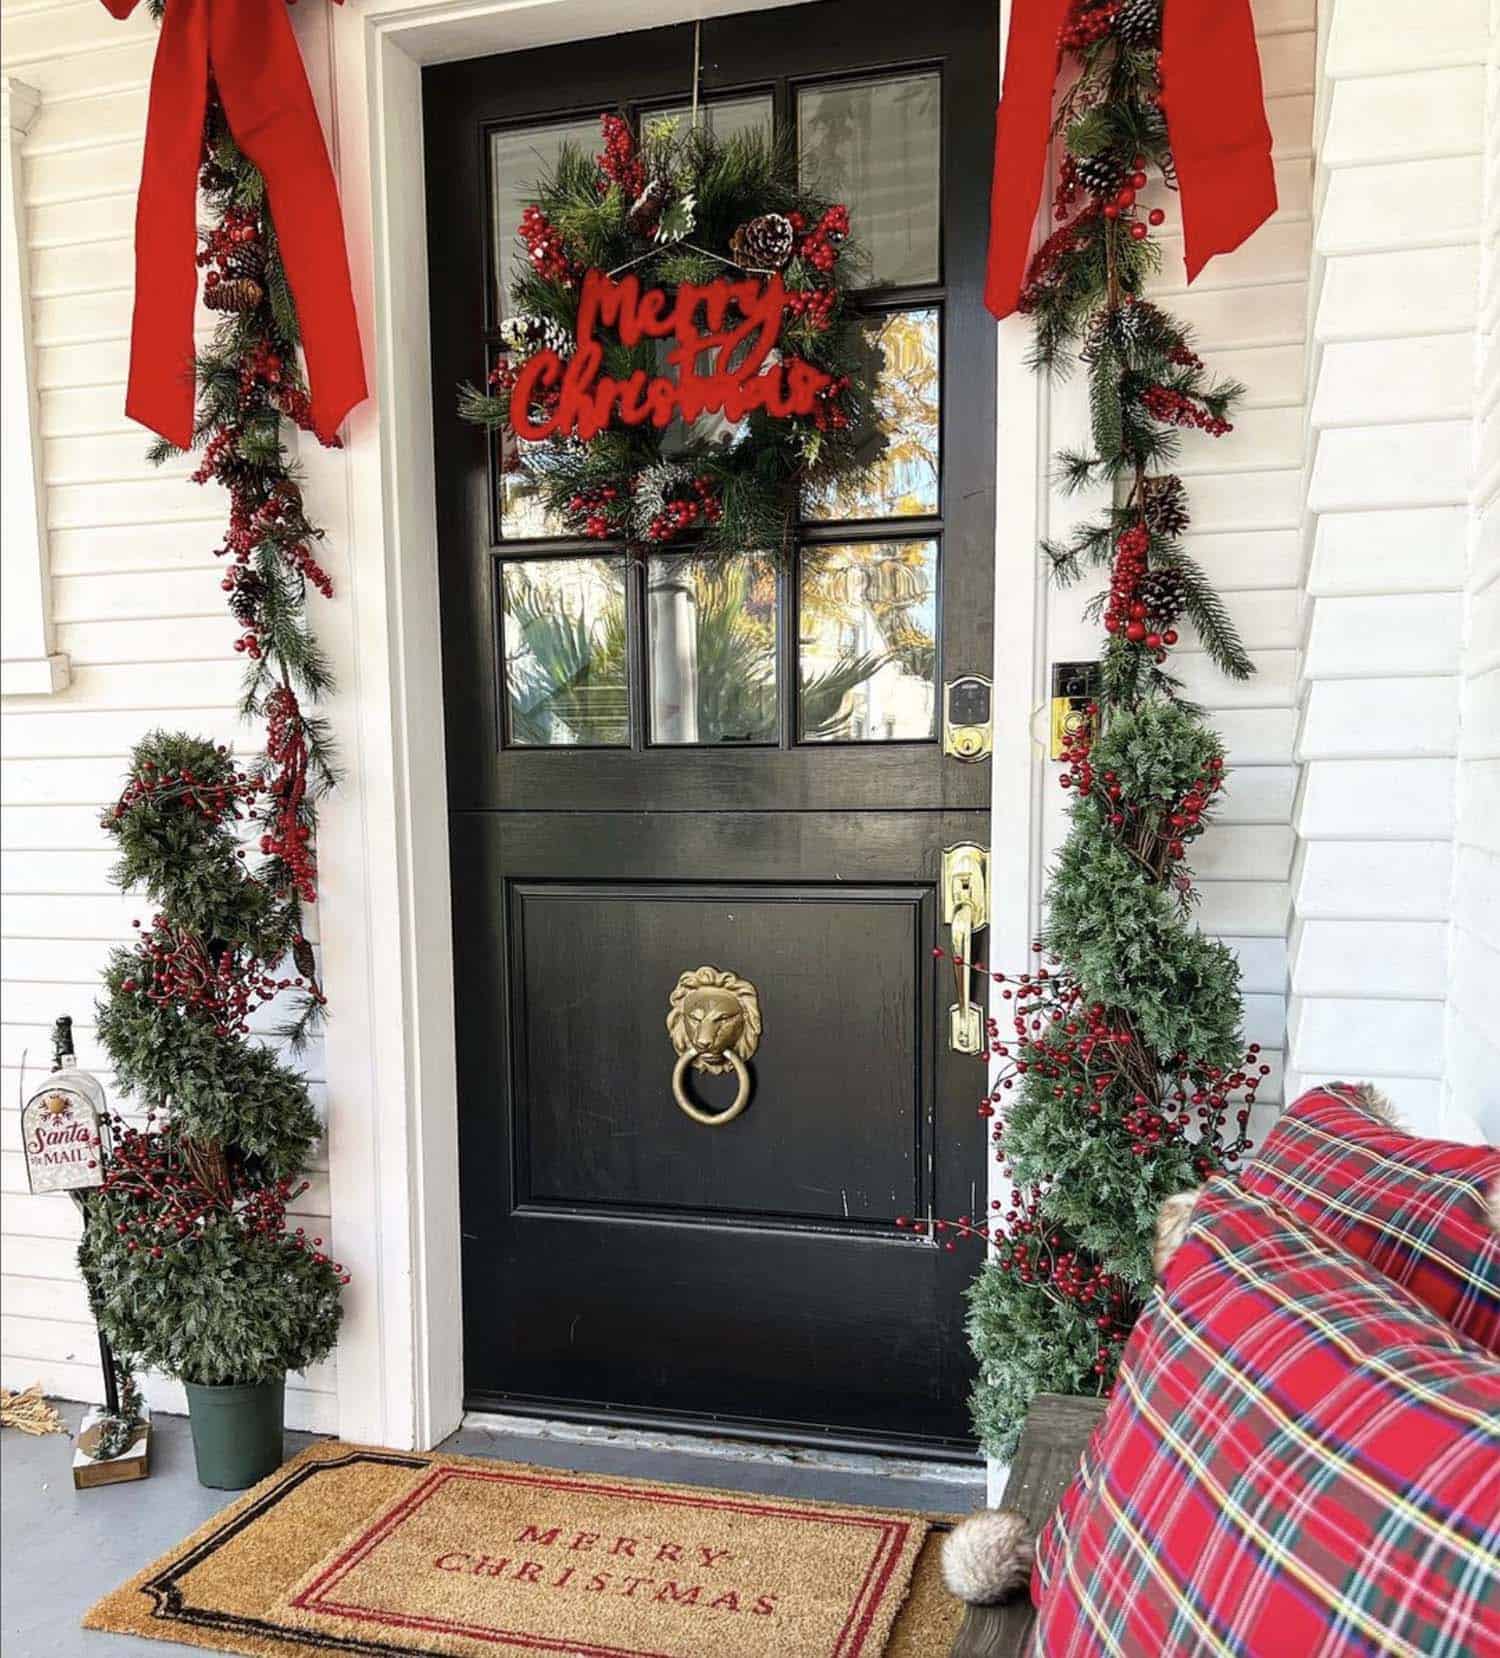 festive and cozy Christmas decorated front porch with red and green 